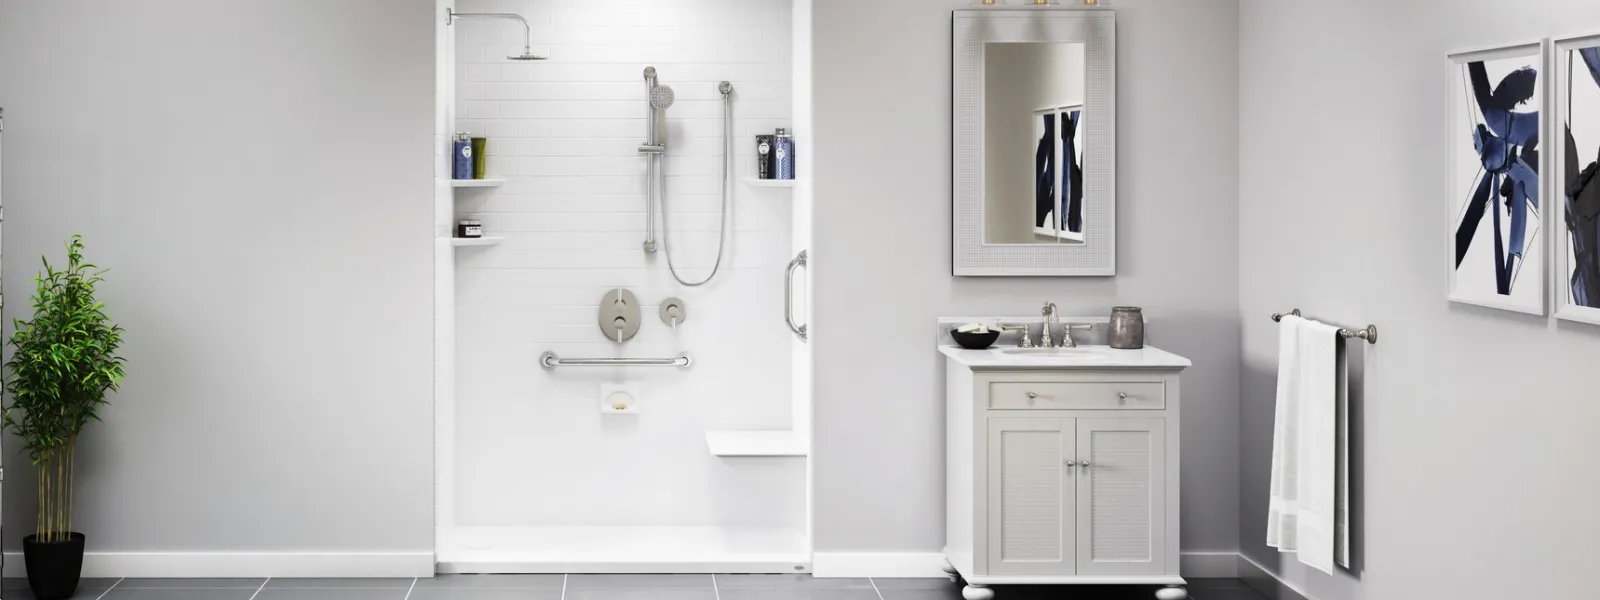 Make your bathroom safe with these special features